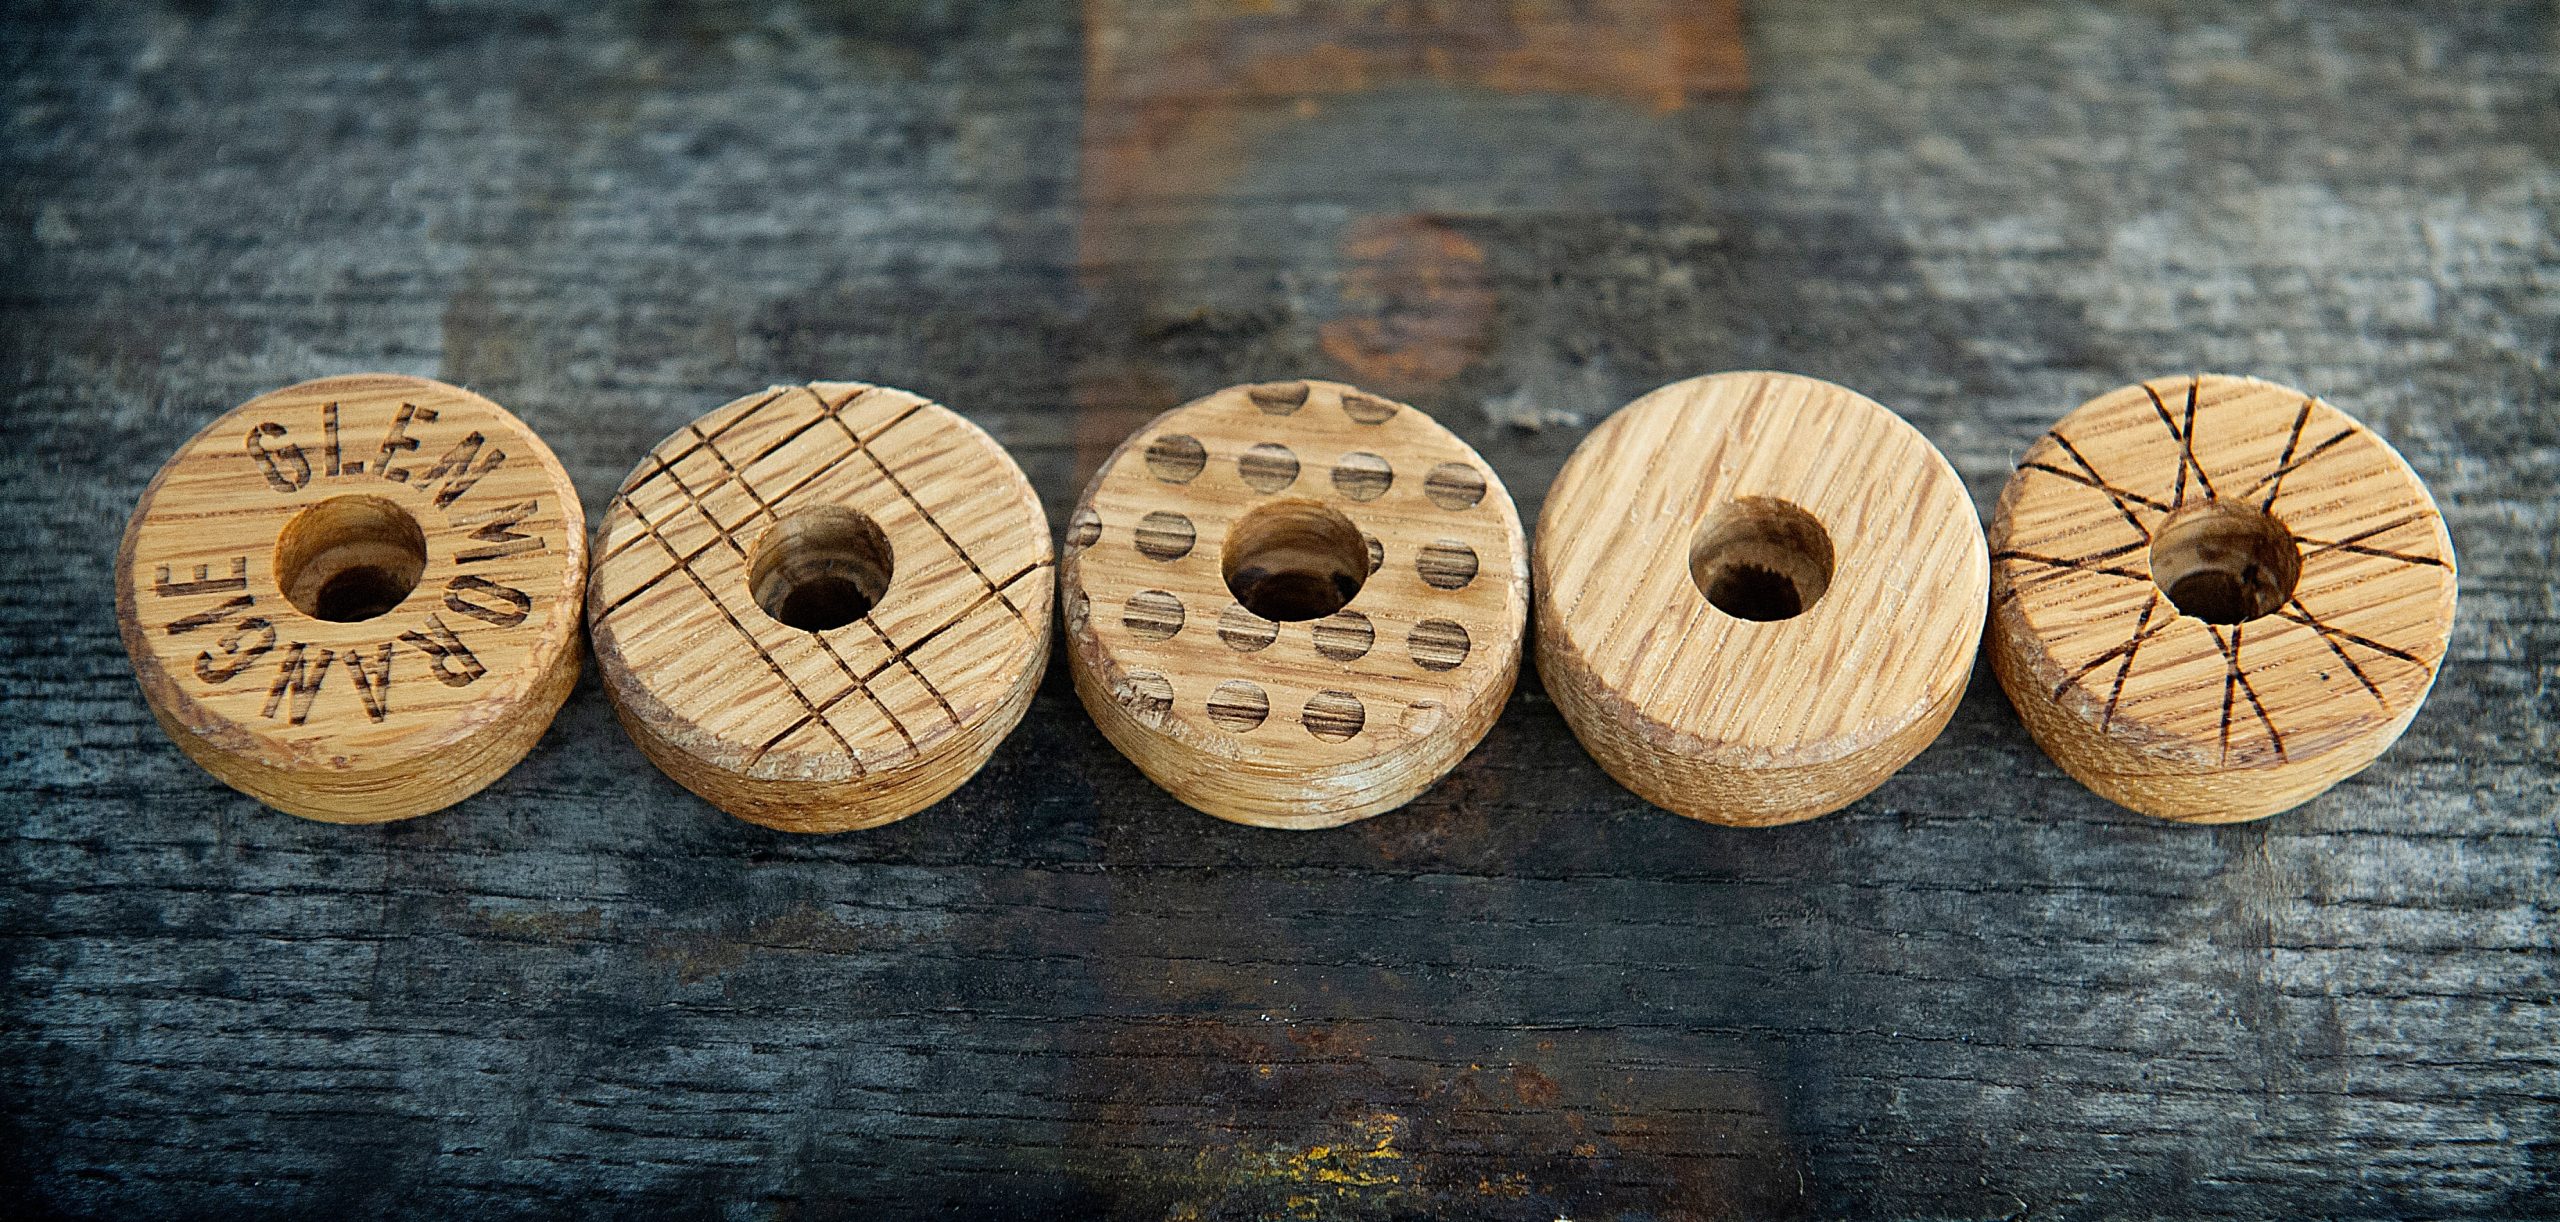 Cask Finery launches bicycle accessories crafted from reclaimed Scotch  whisky barrels - Products - BikeBiz